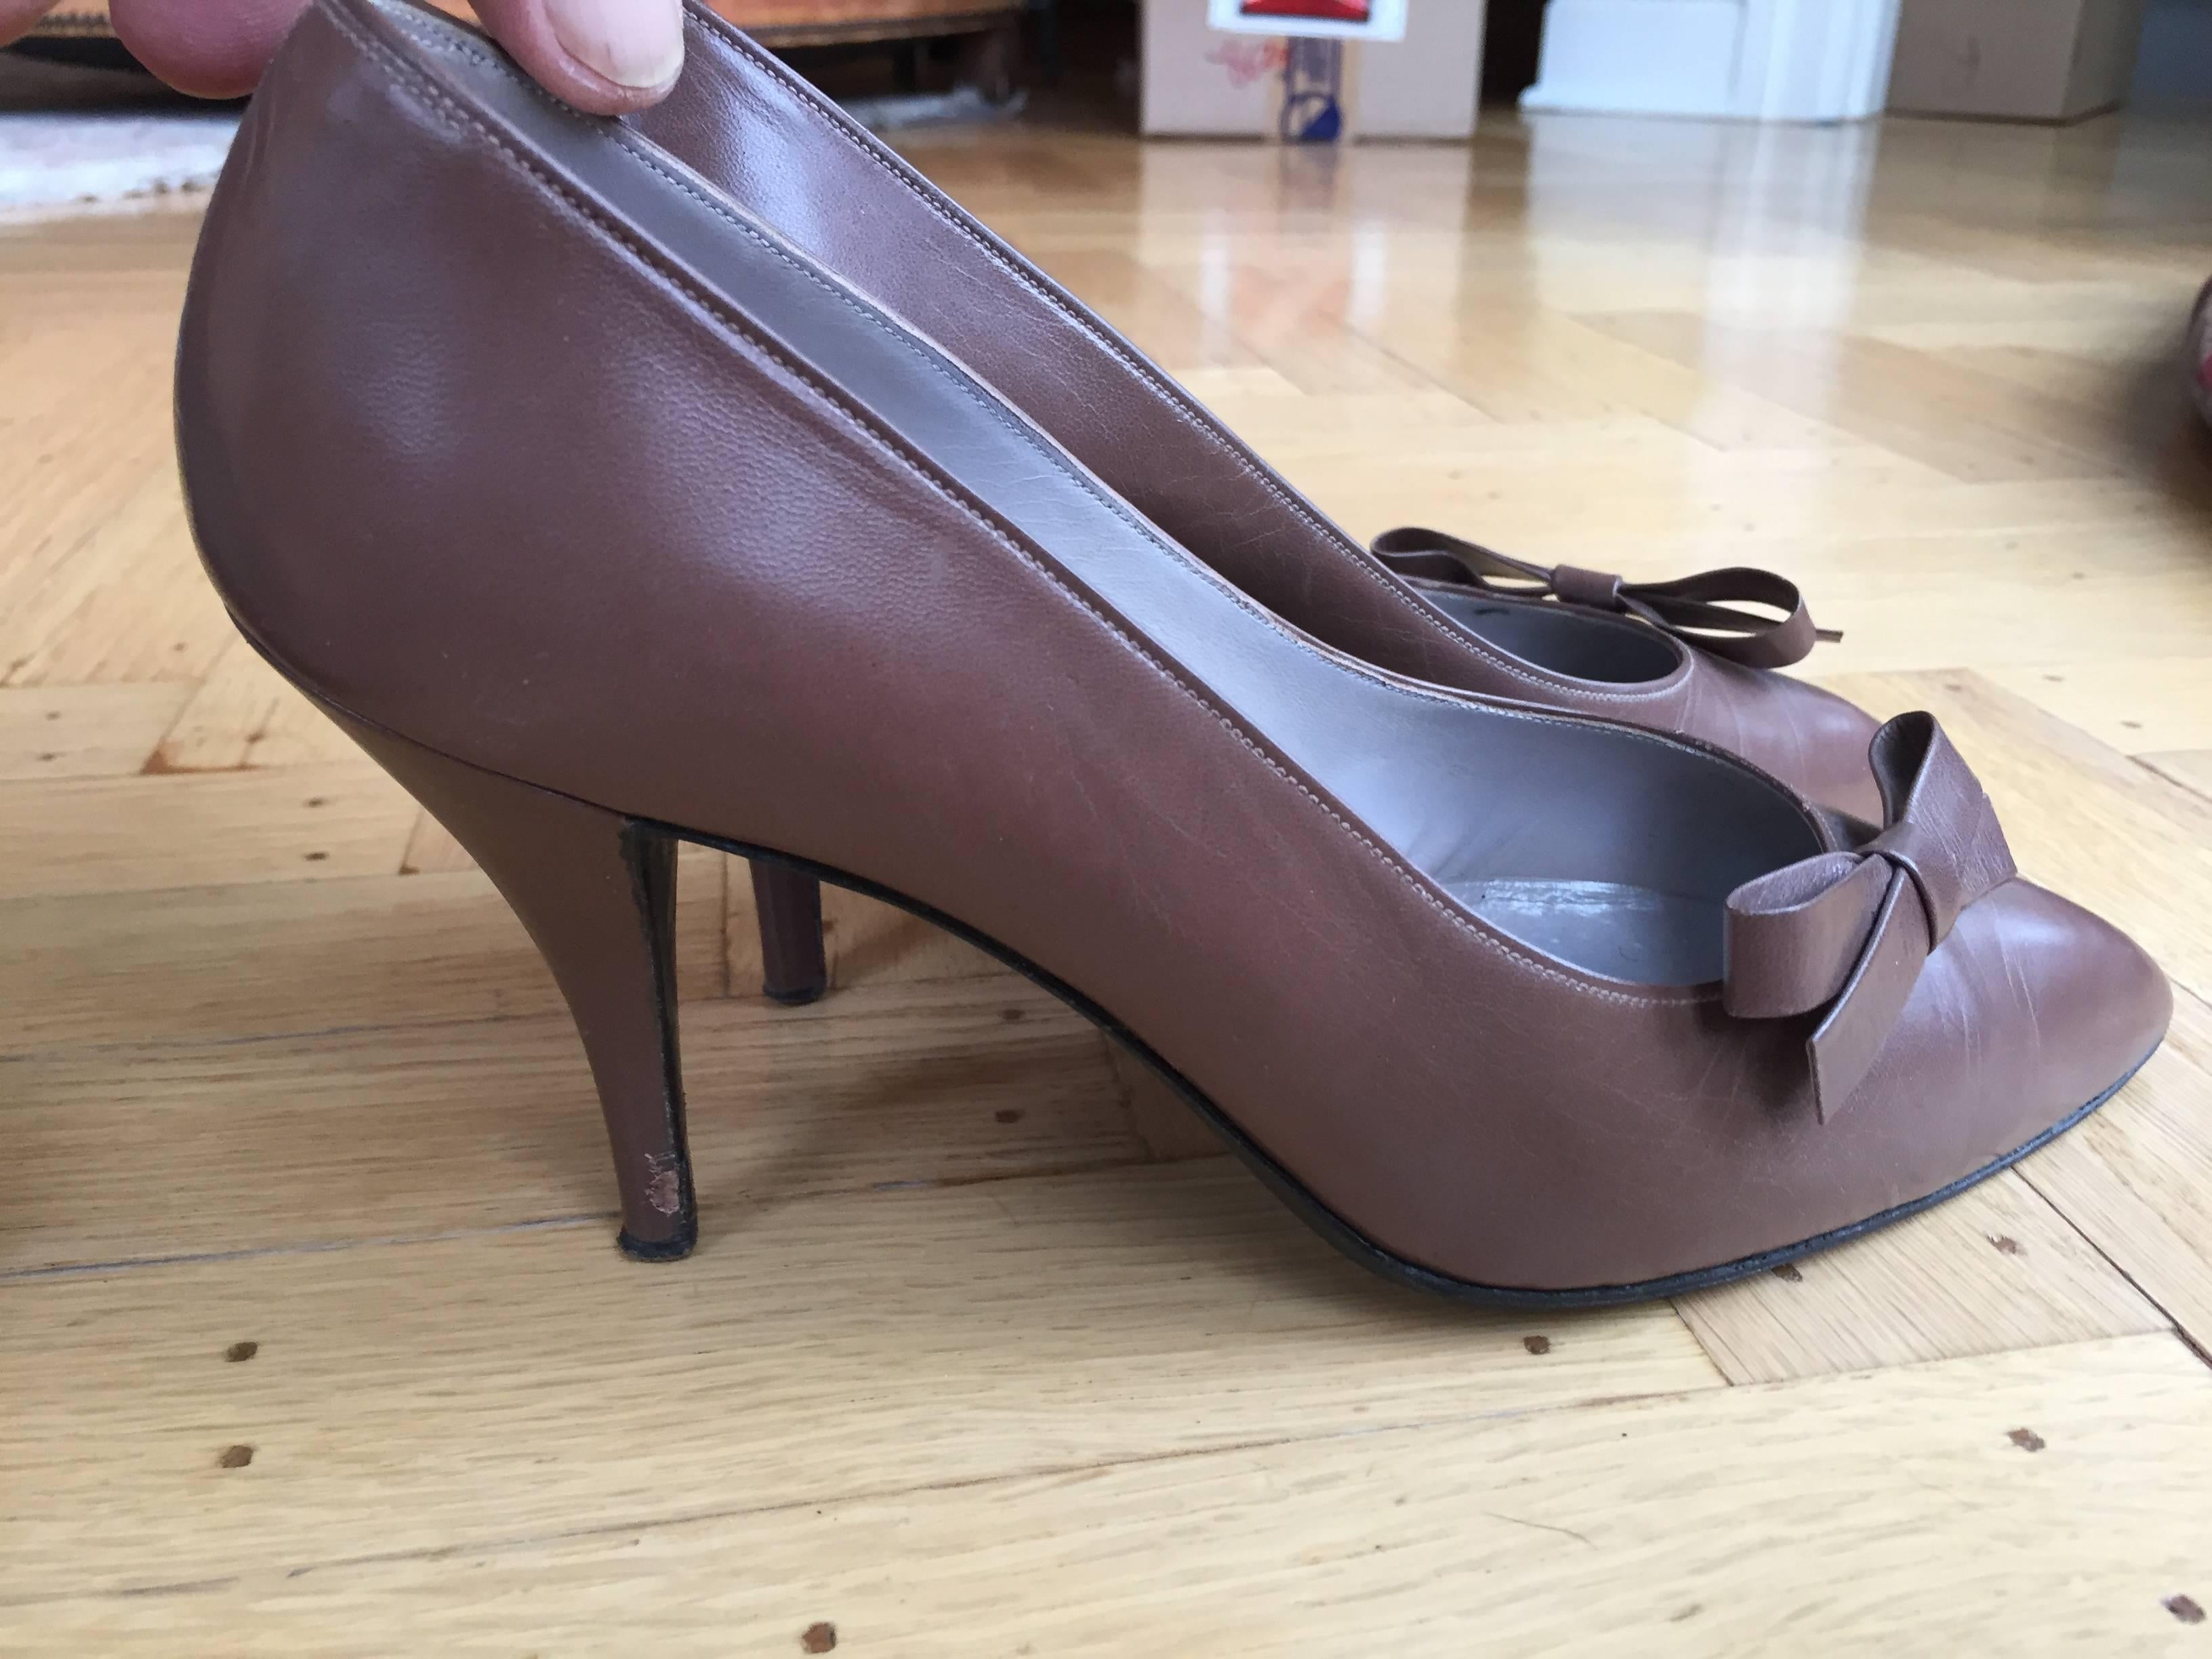 Brown Leather Christian DIor 1959 Haute Couture Pumps par Roger Vivier.

Original owner wore size 6 and 6 1/2 
From the collection of Eleanor Louise Christenson de Guigné. 
Eleanor de Guigné was one of the most elegant Grand Dames of the Bay